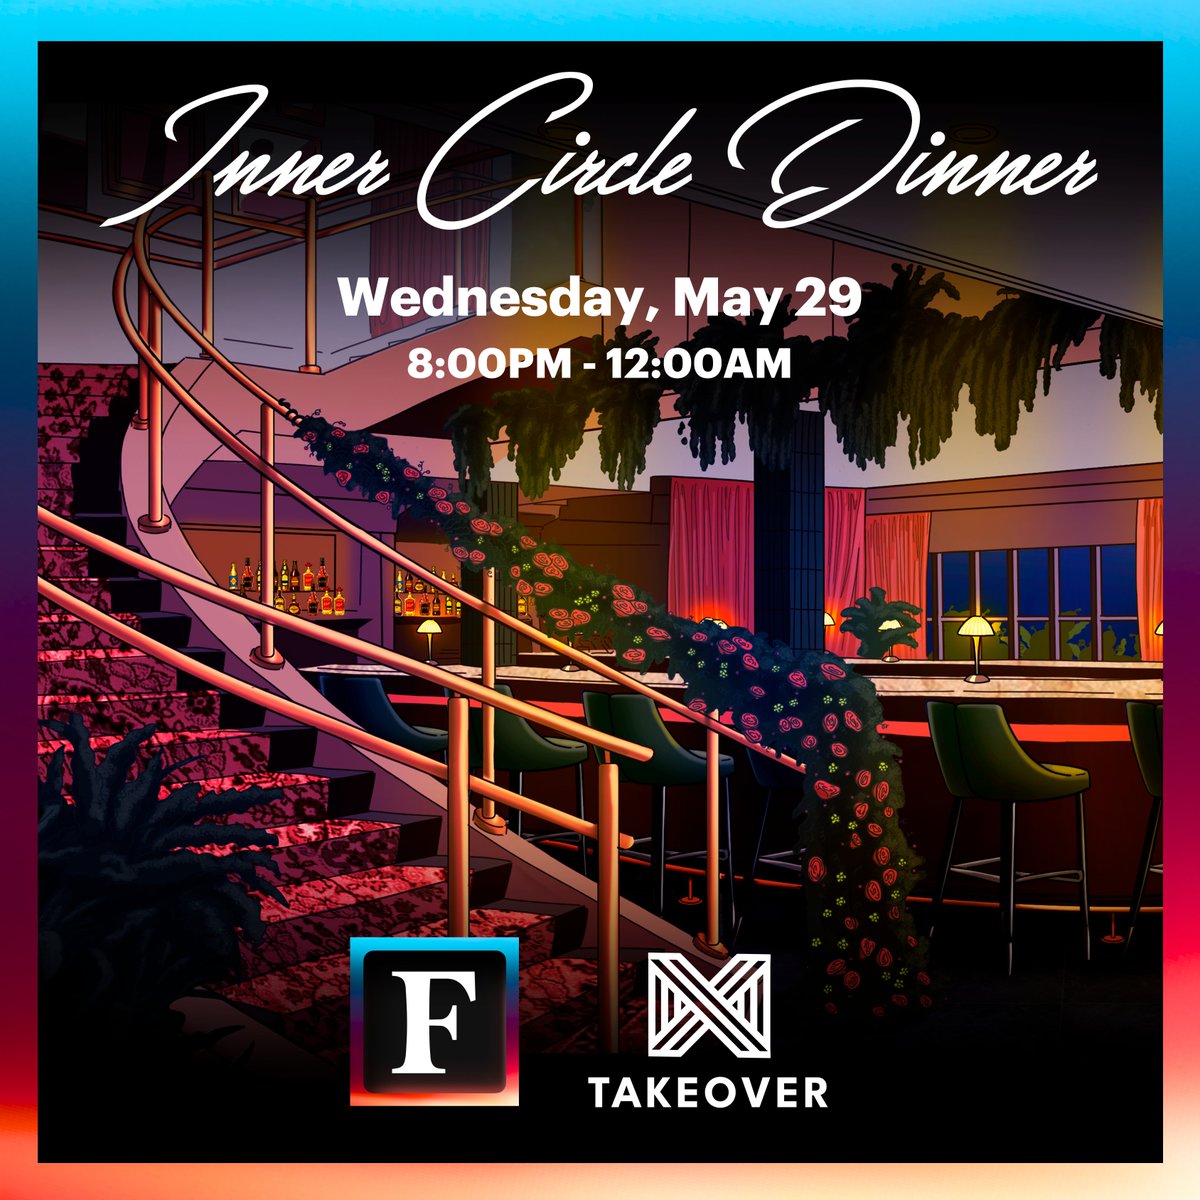 One event at Consensus isn't enough🥂 Thrilled to share the Forbes Inner Circle Founders Dinner, the night after our Welcome Party. We've taken over a premier downtown restaurant with @takeoverIRL for an invite-only evening exclusively for our community & partners Stay tuned👀